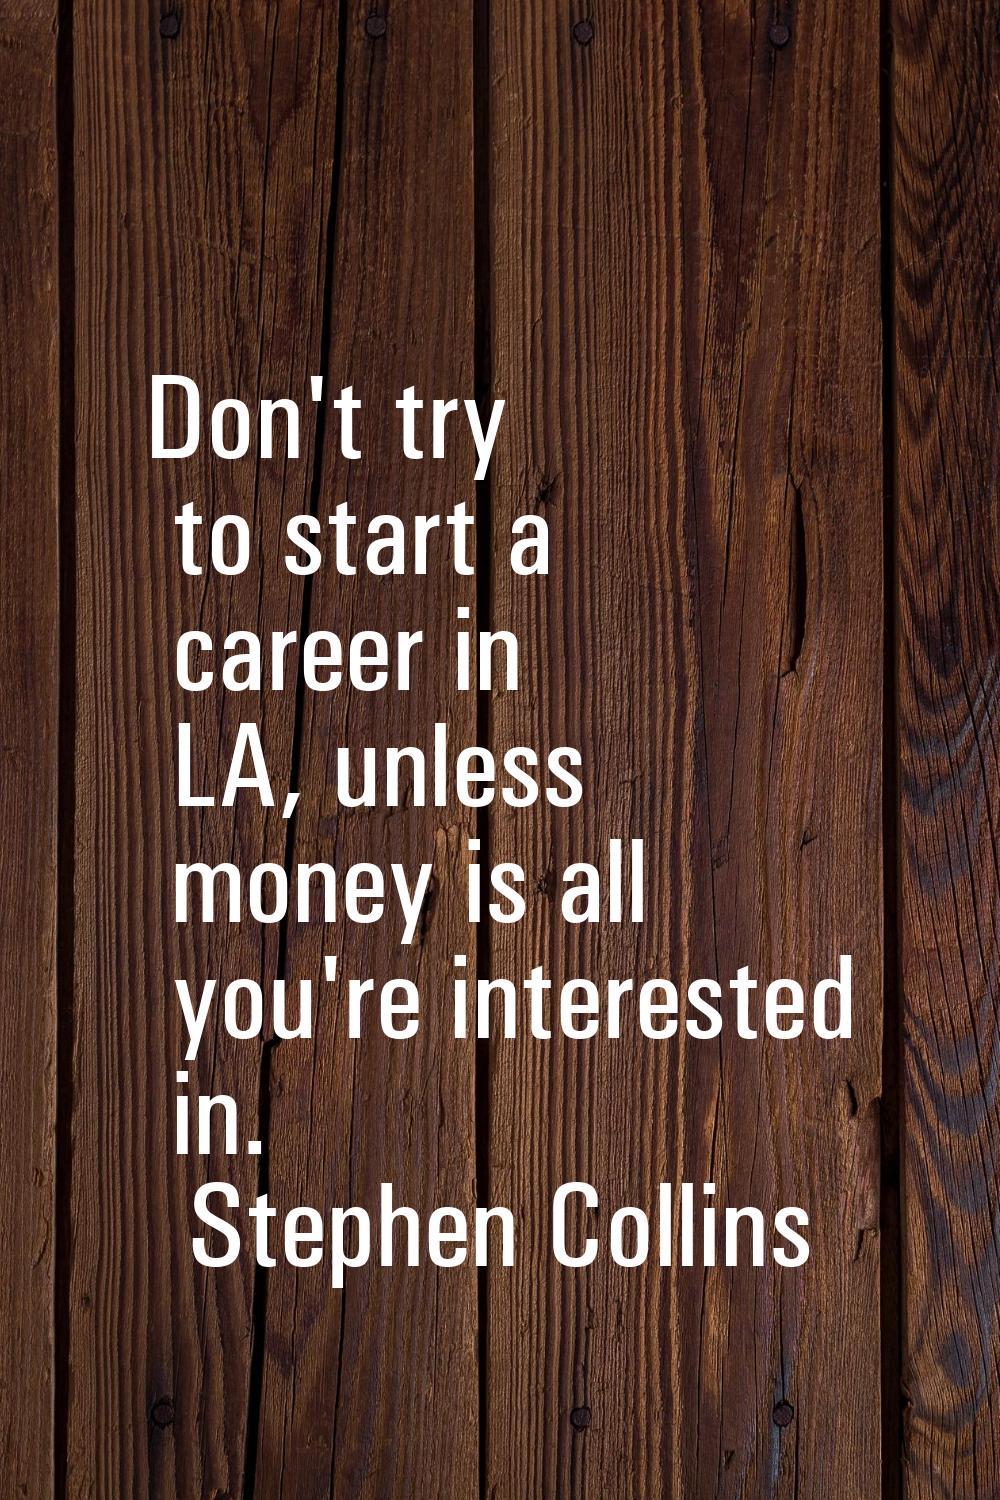 Don't try to start a career in LA, unless money is all you're interested in.